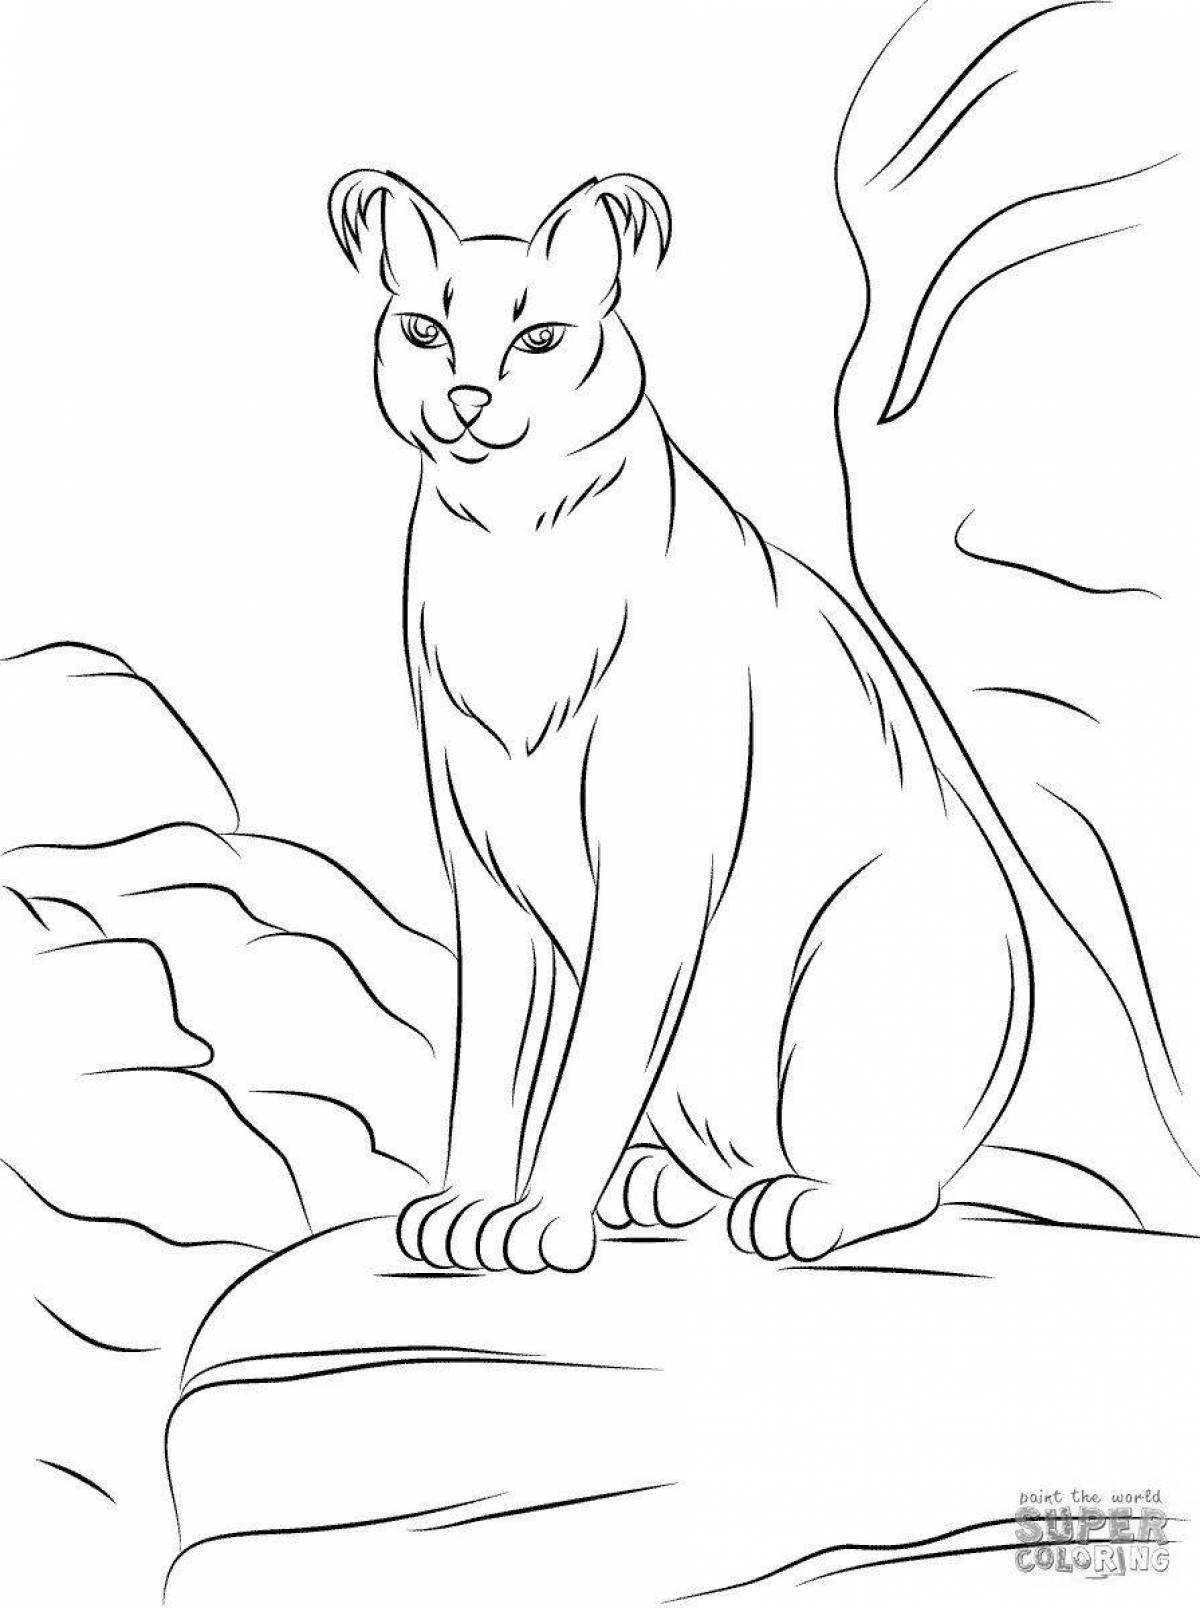 Playful caracal coloring page